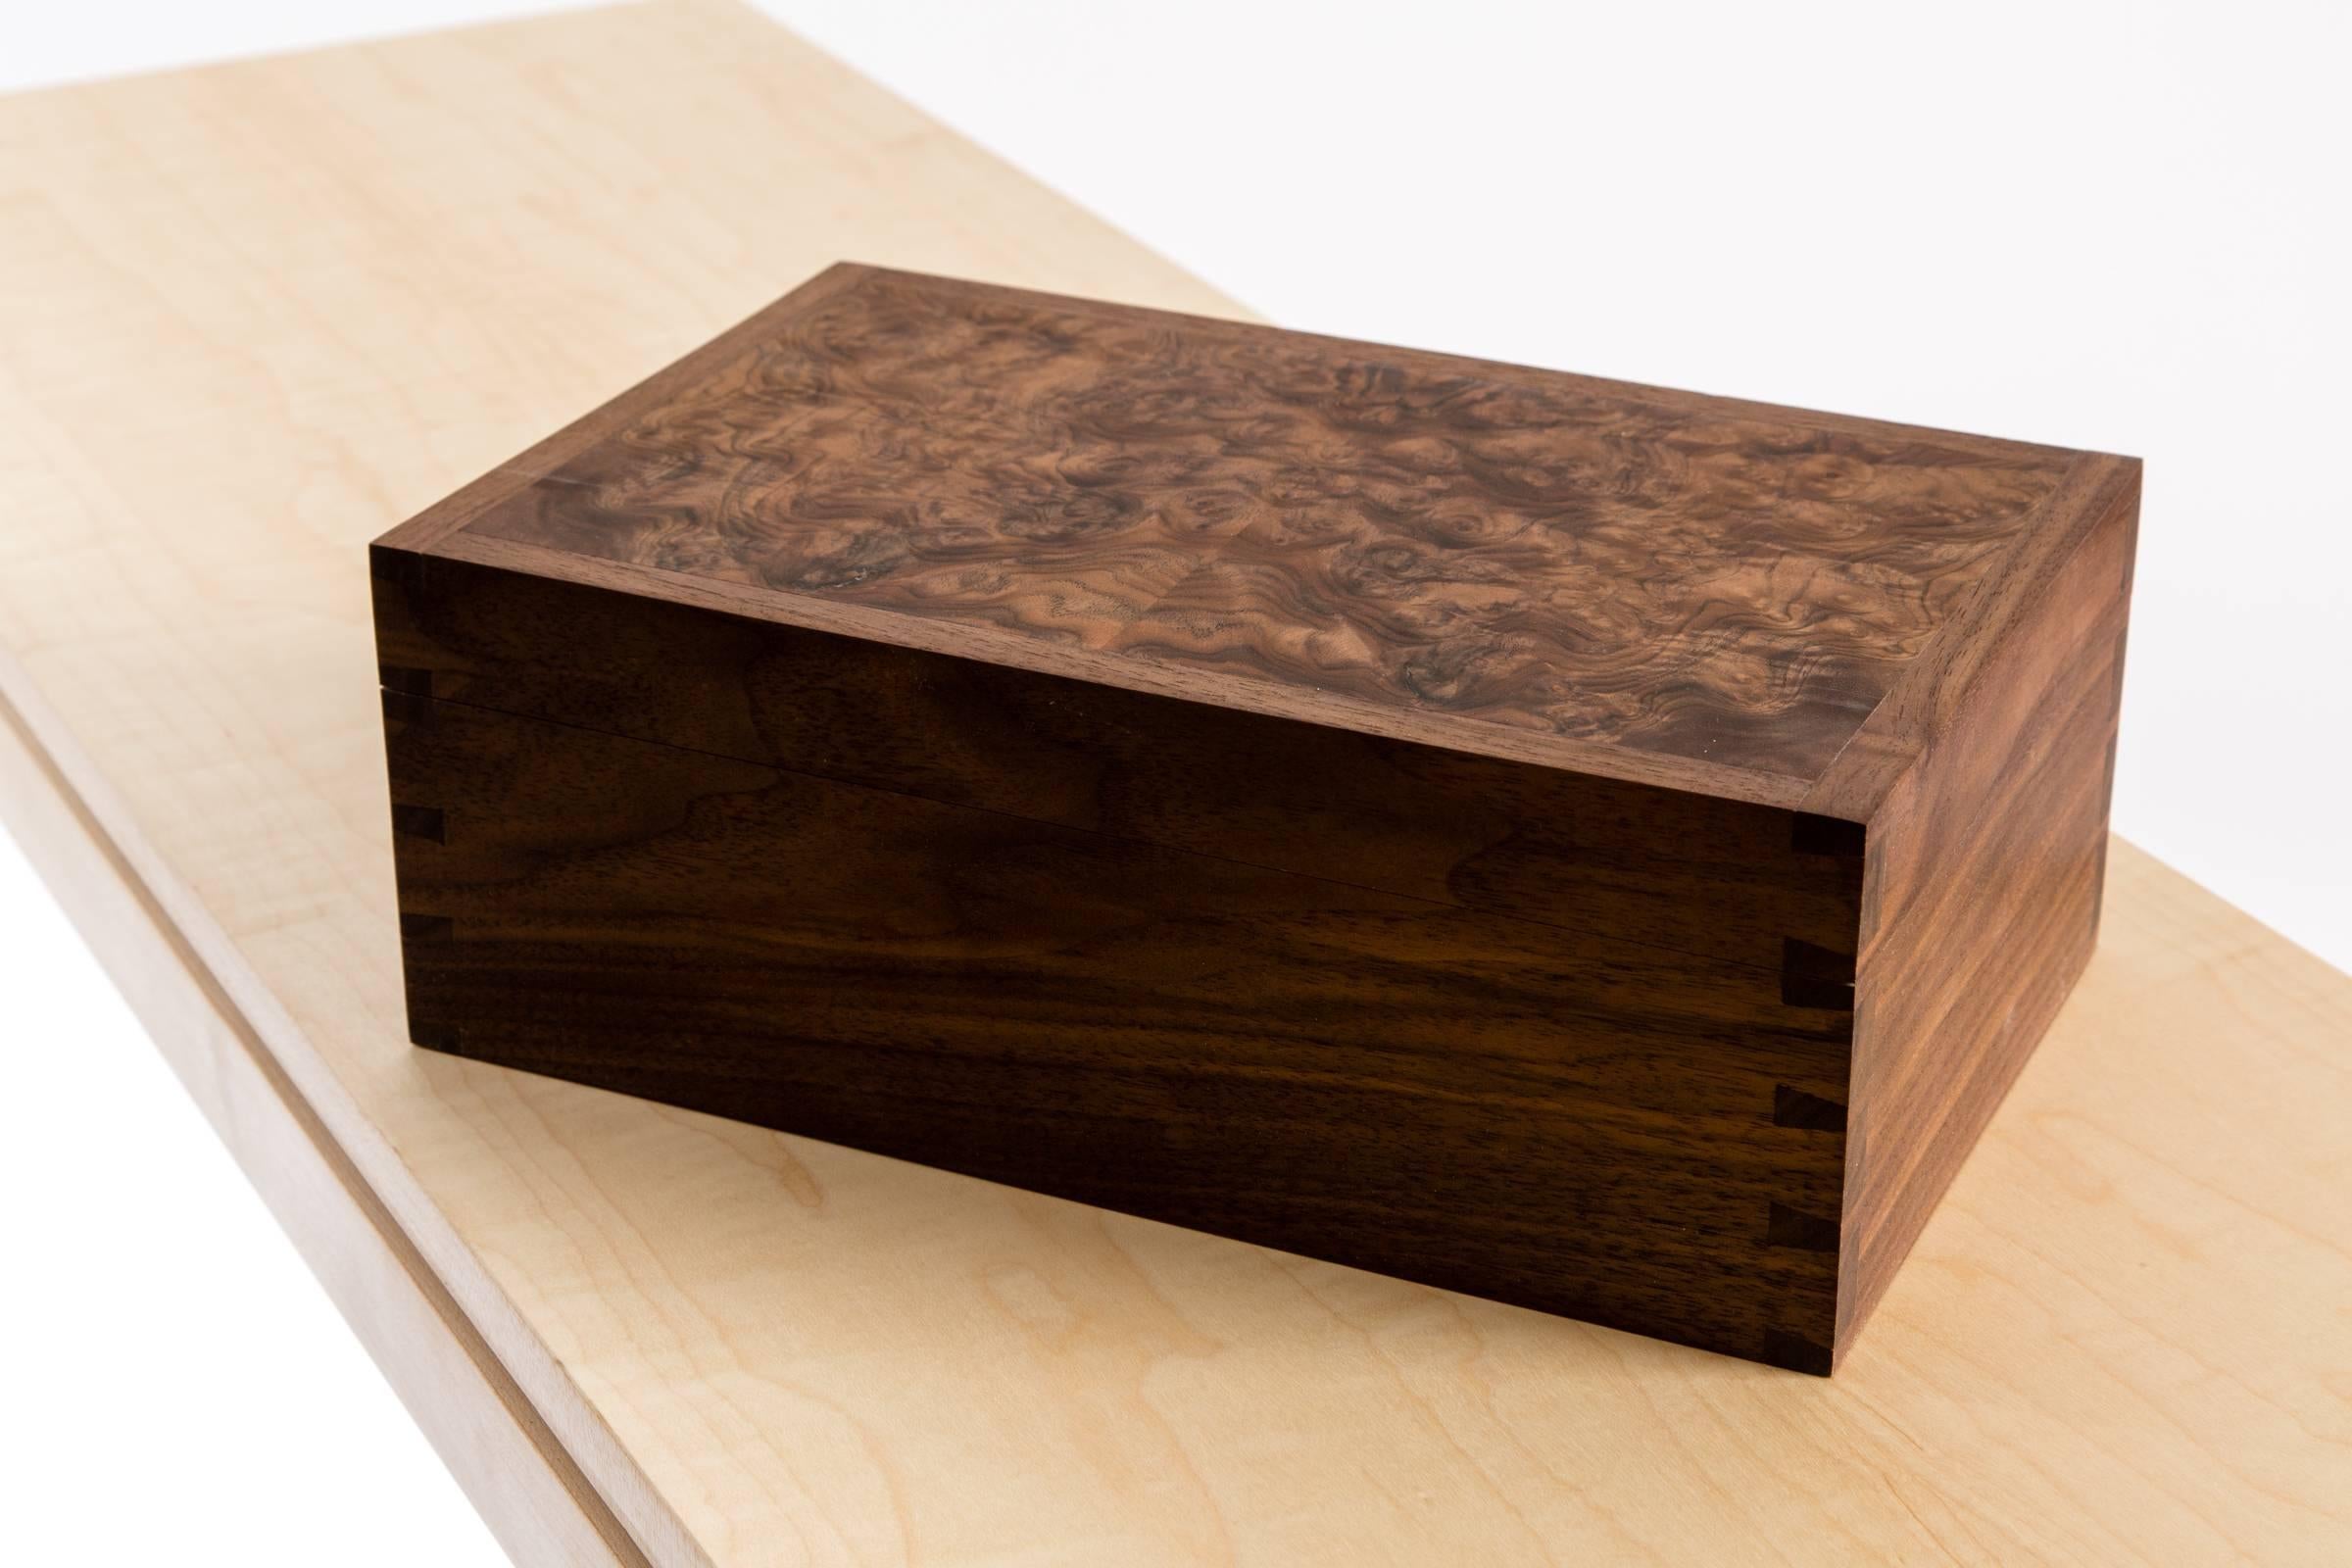 A walnut, burr walnut and maple dovetailed jewelry box.

All my work is finished by hand using traditional methods and tools. This means that it is always individual, unique and bears the imprint of the maker’s hands.